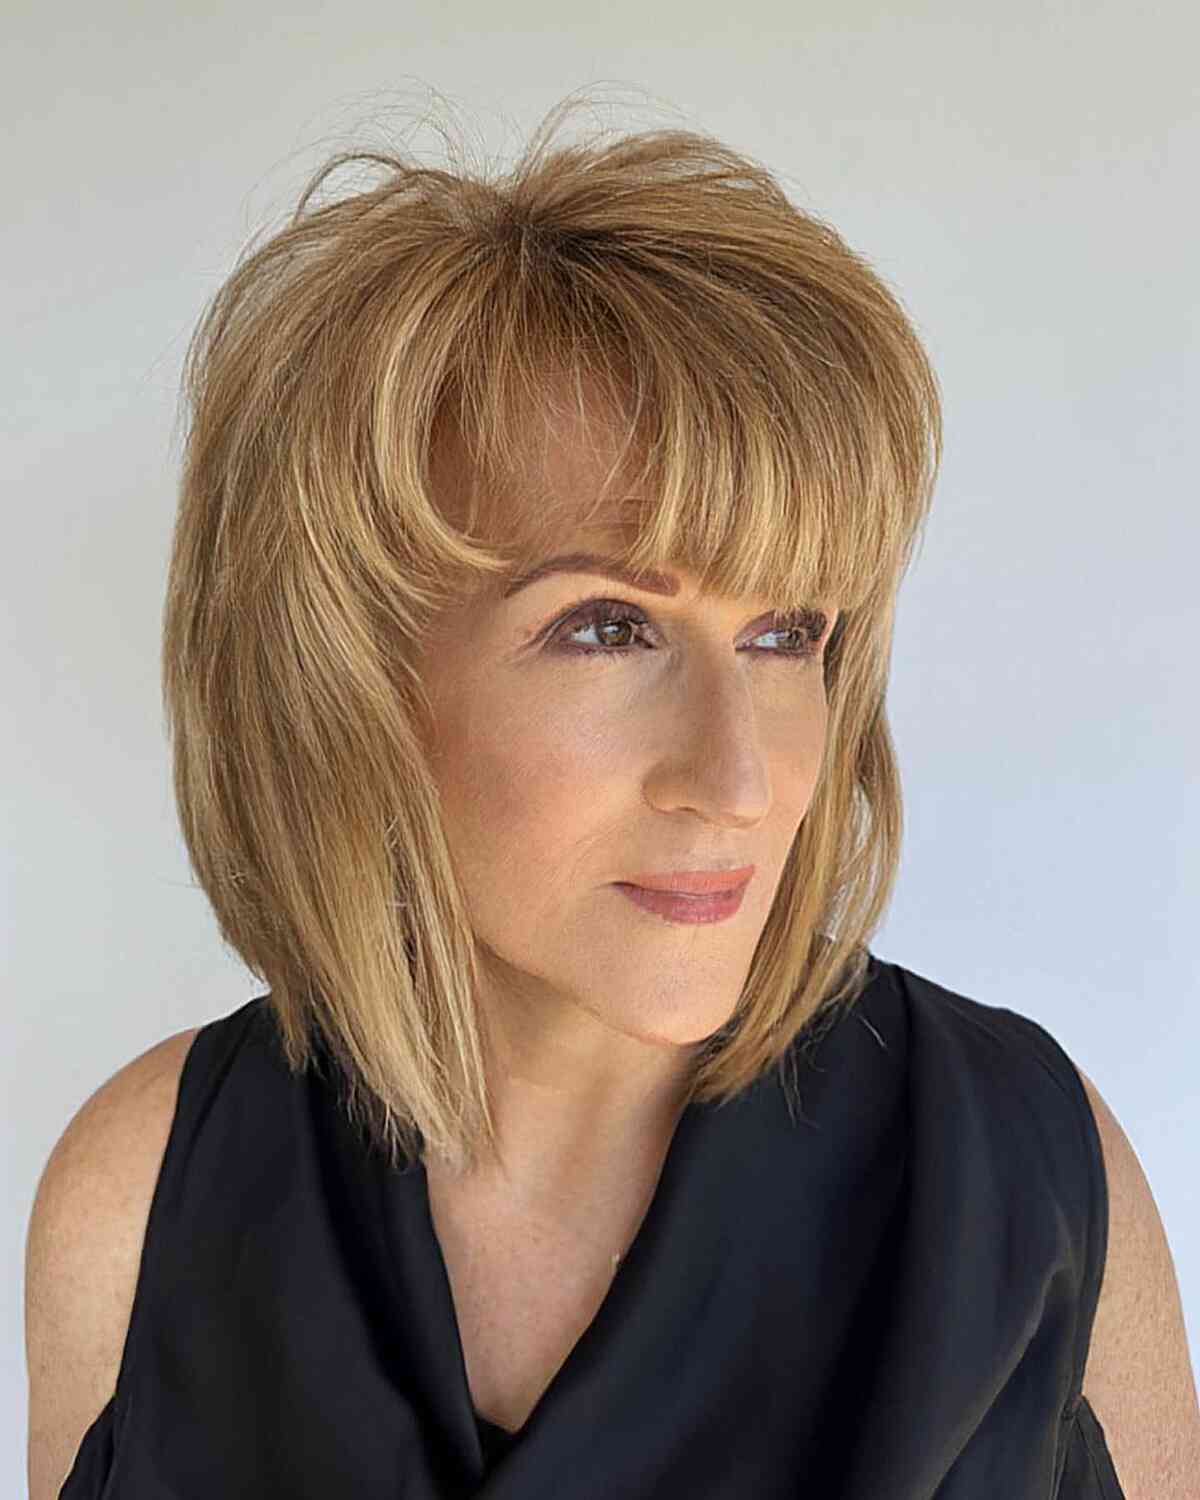 Golden Blonde Layered Style for Women in Their 40s with thicker hair